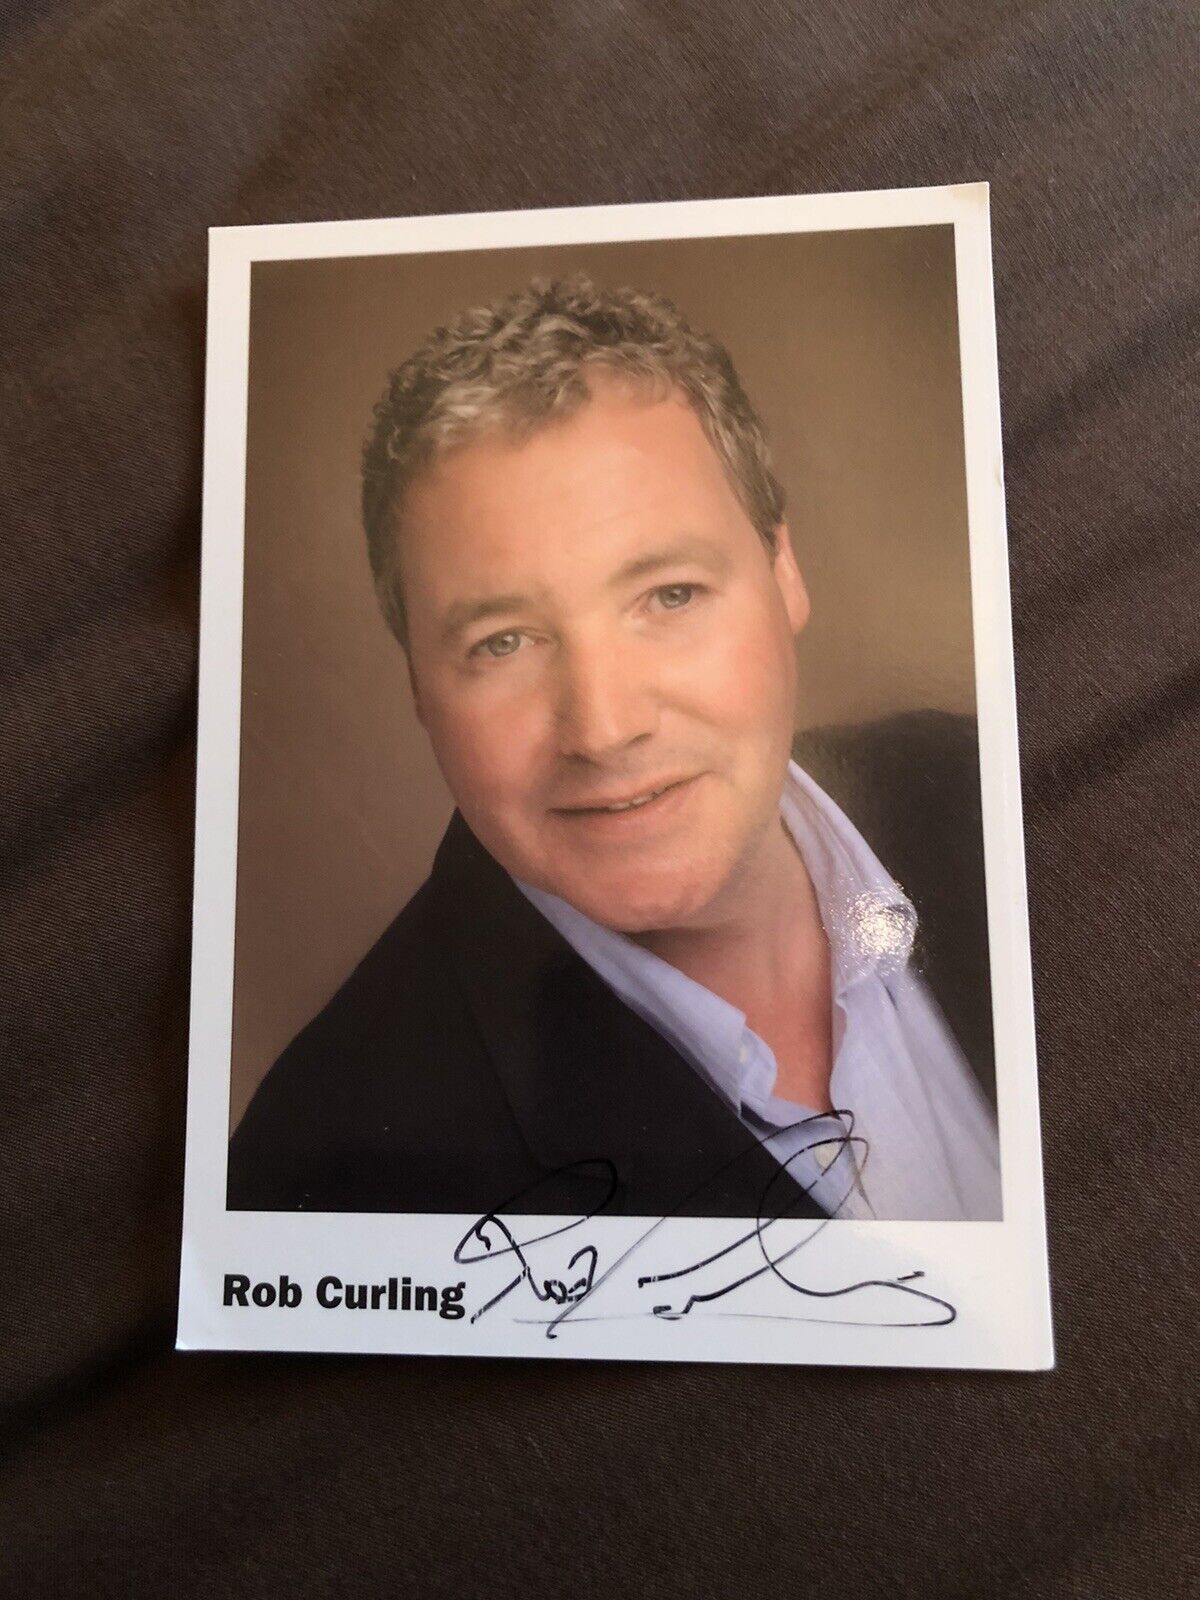 ROB CURLING (TV PRESENTER) SIGNED Photo Poster painting